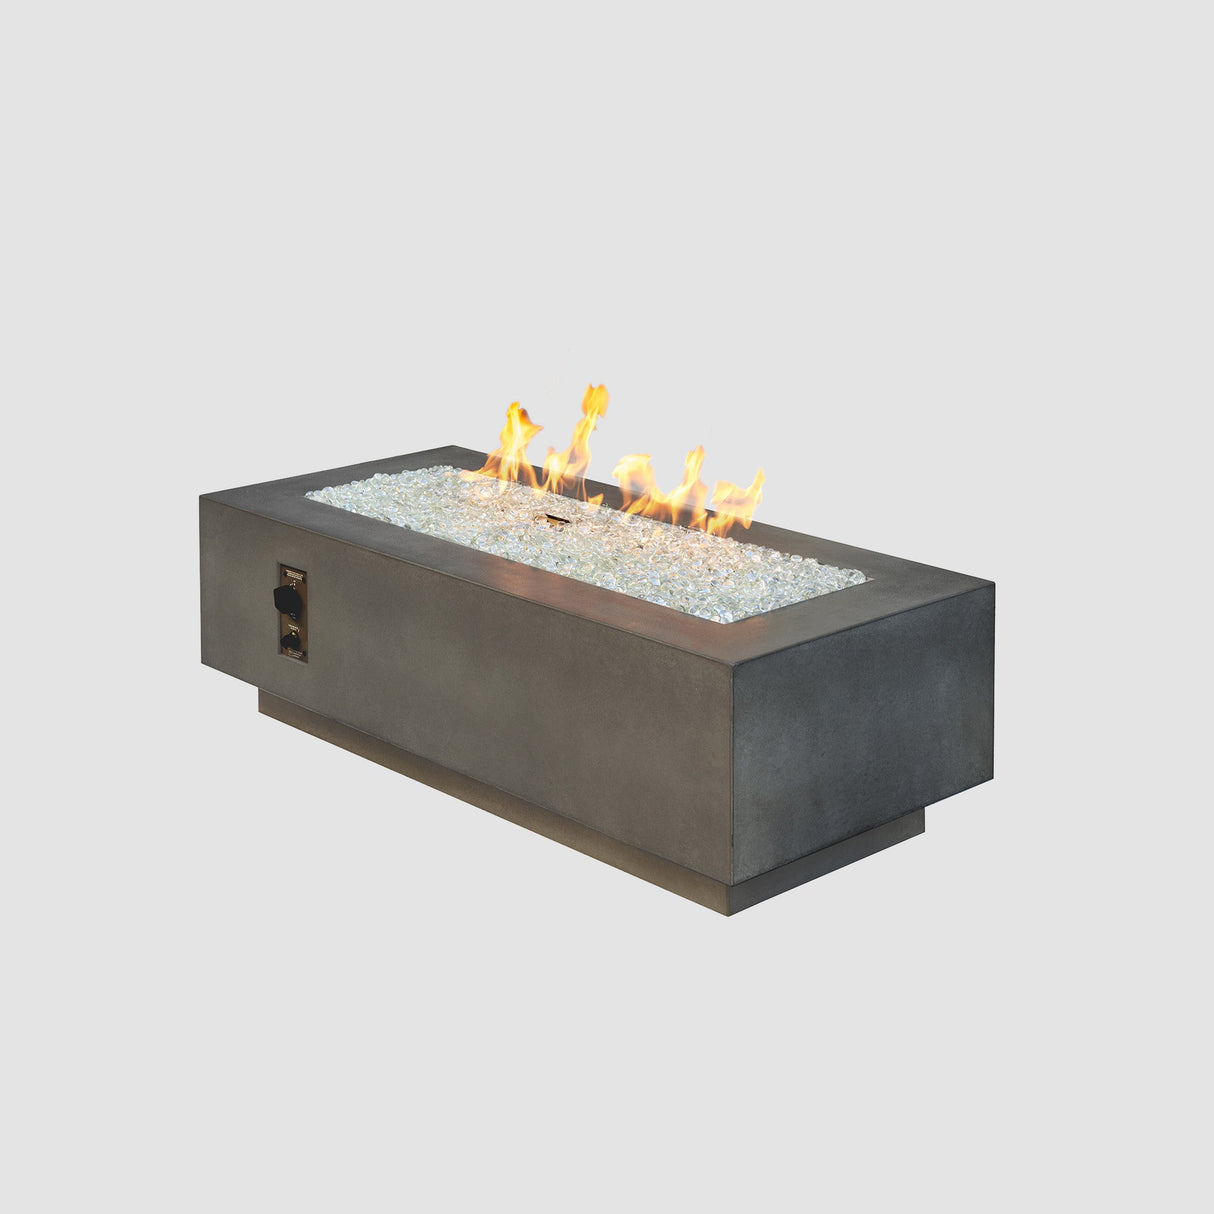 Midnight Mist Cove Linear Gas Fire Pit Table 54" on a grey background